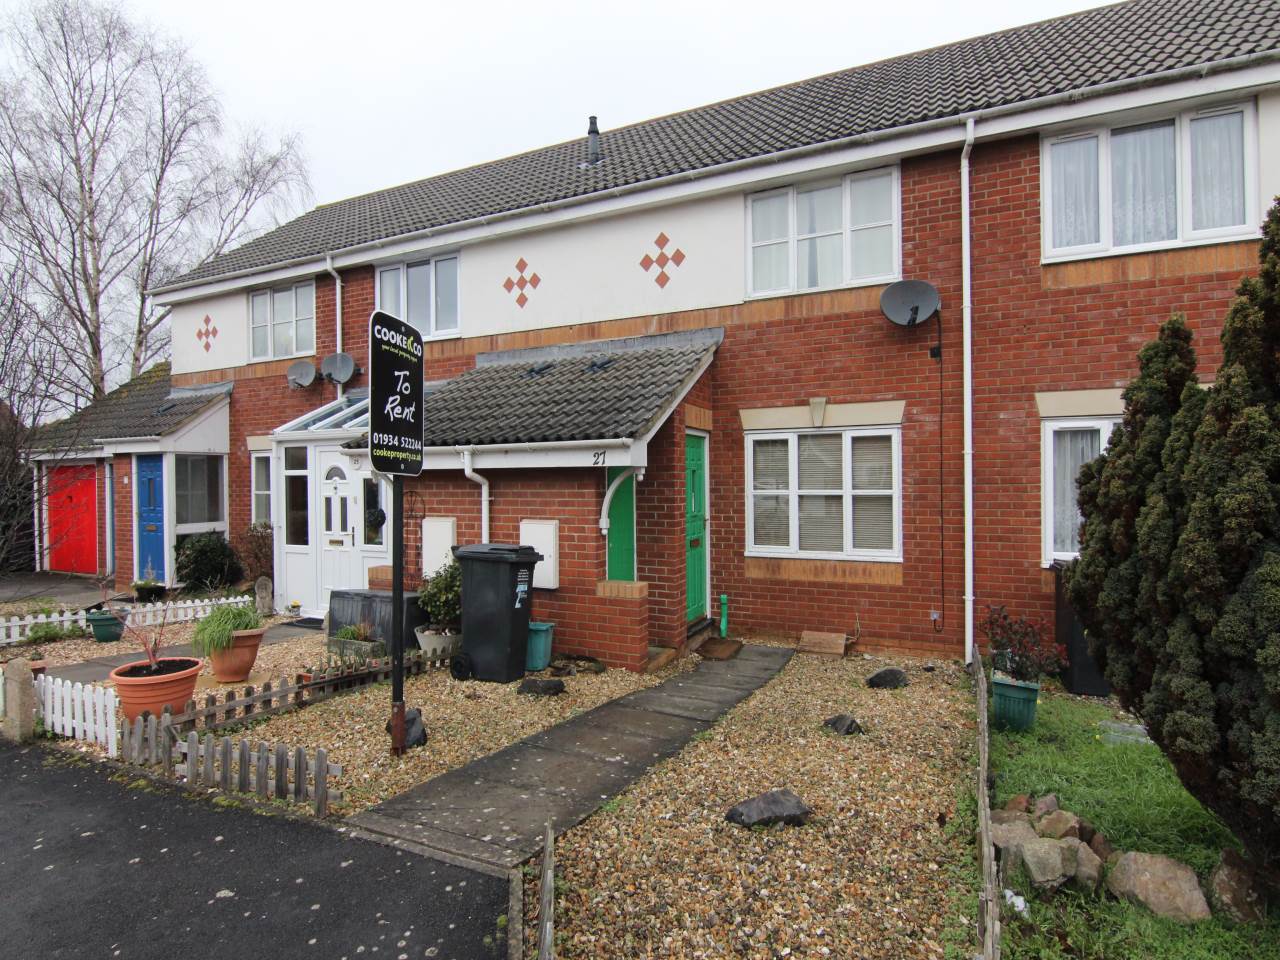 2 bed House (unspecified) for rent in Kewstoke. From Cooke and Co (Weston Super Mare)